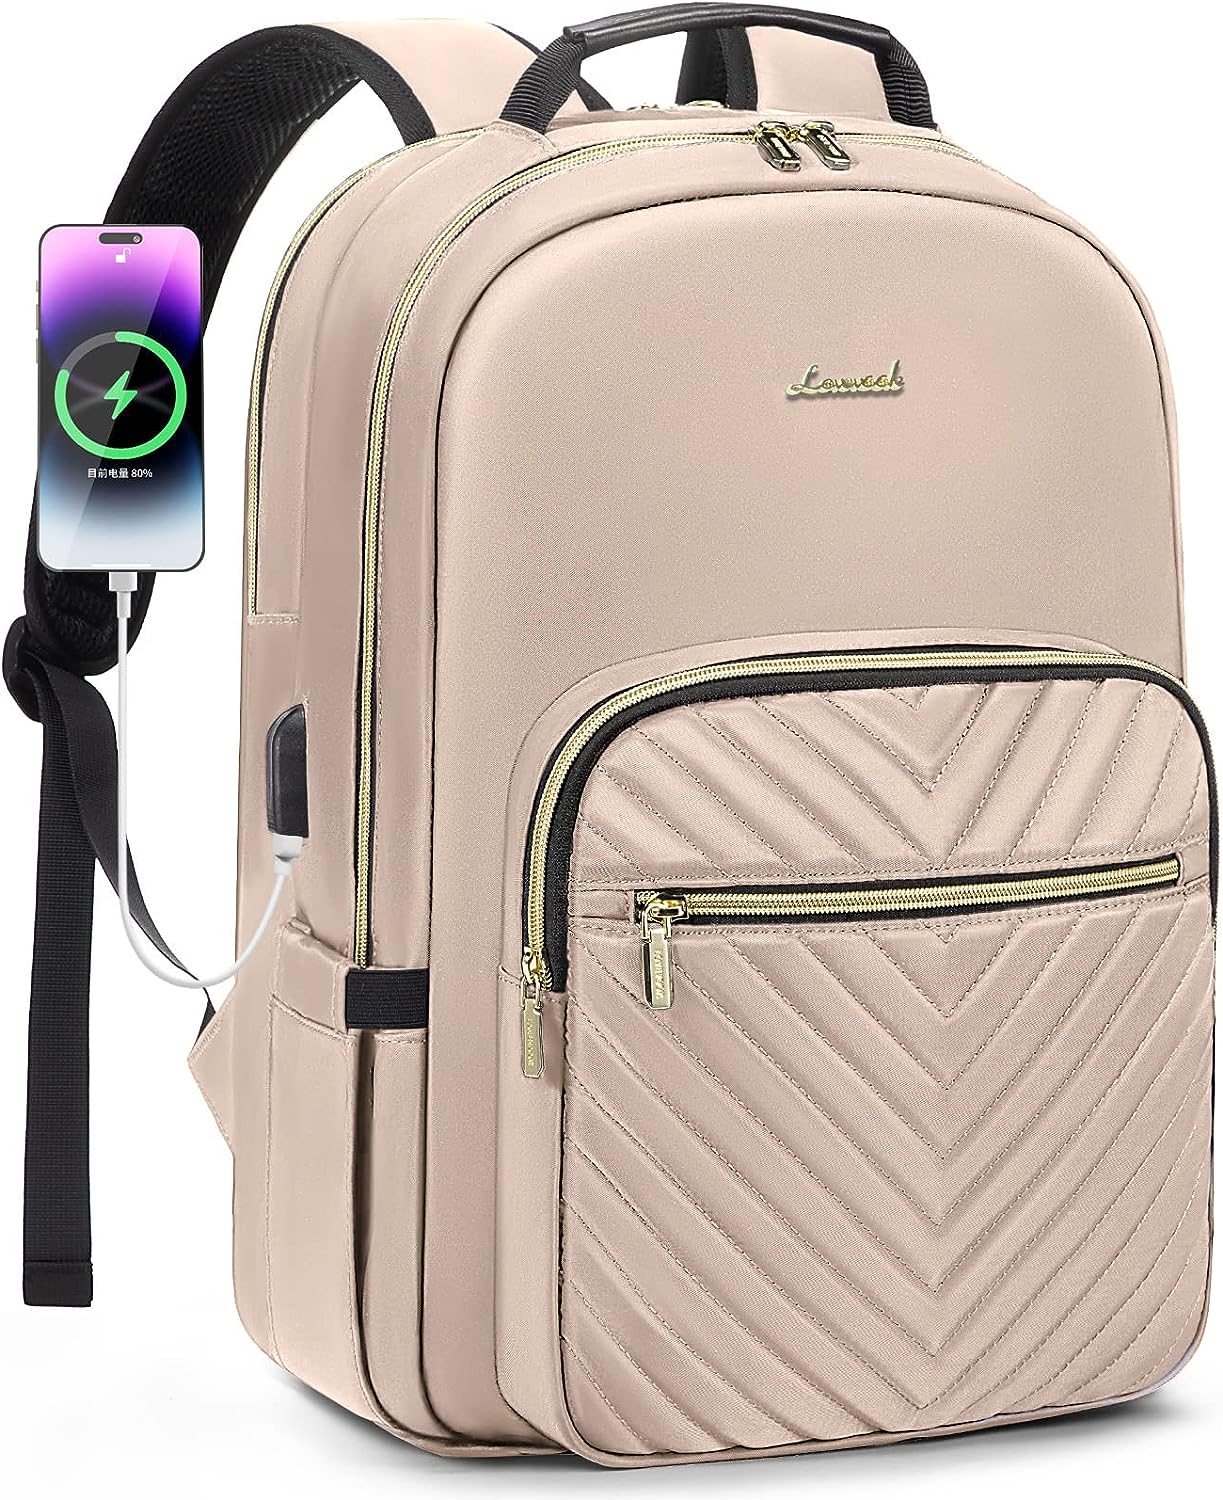 LOVEVOOK Laptop Backpack for Women 15.6 inch,Cute [...]